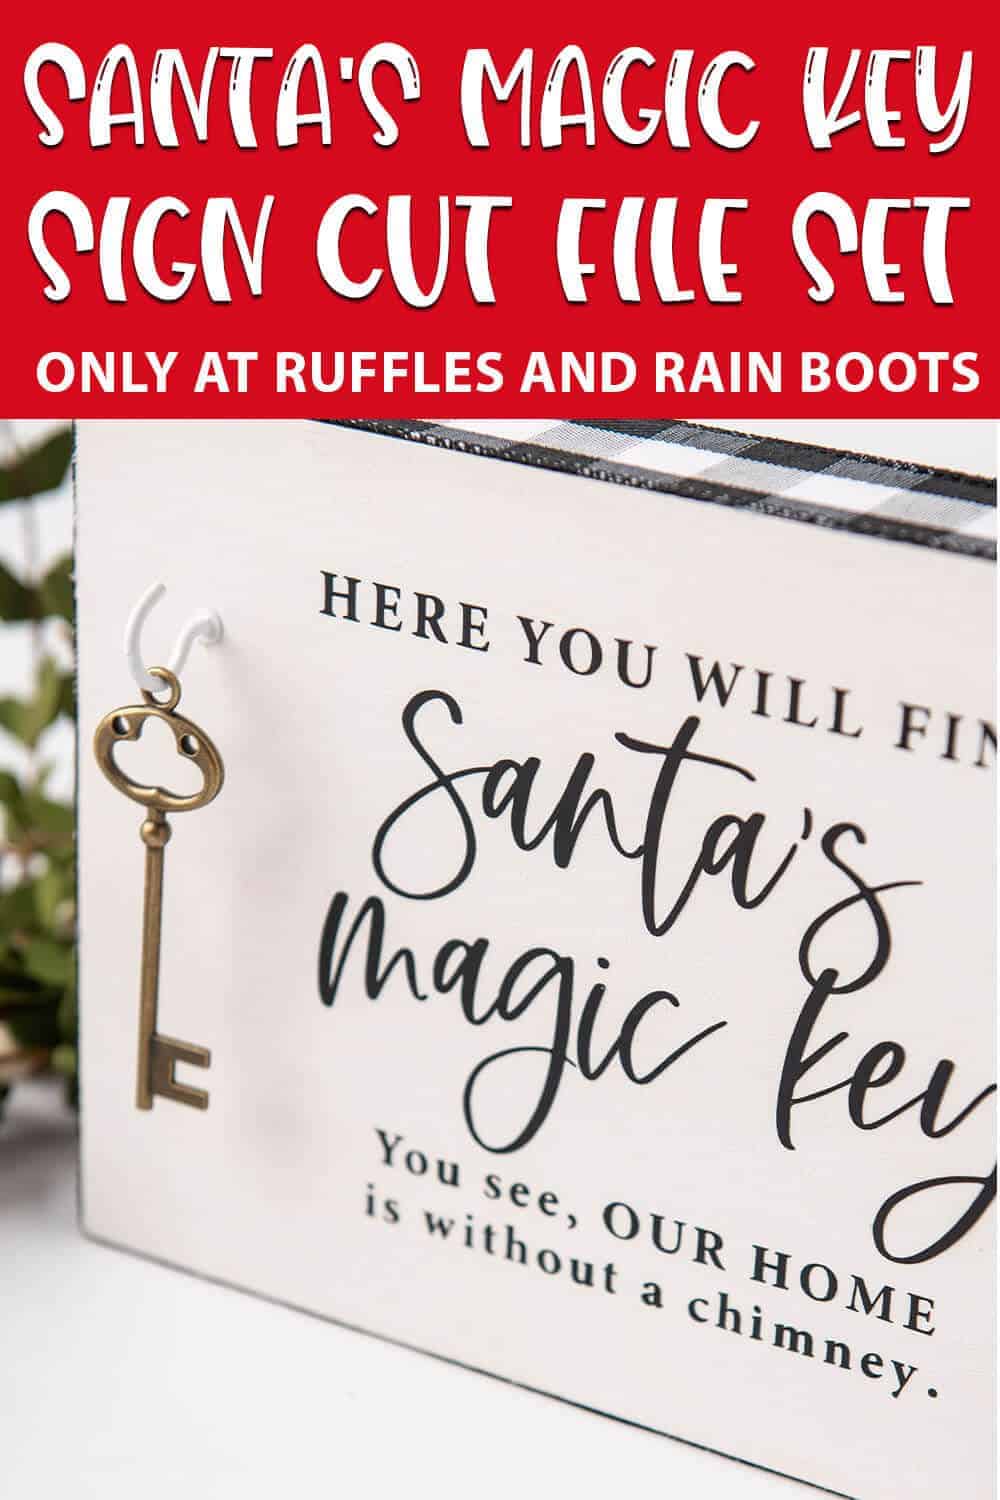 closeup of wall sign for santa for houses without a chimney with text which reads santa's magic key sign cut file set